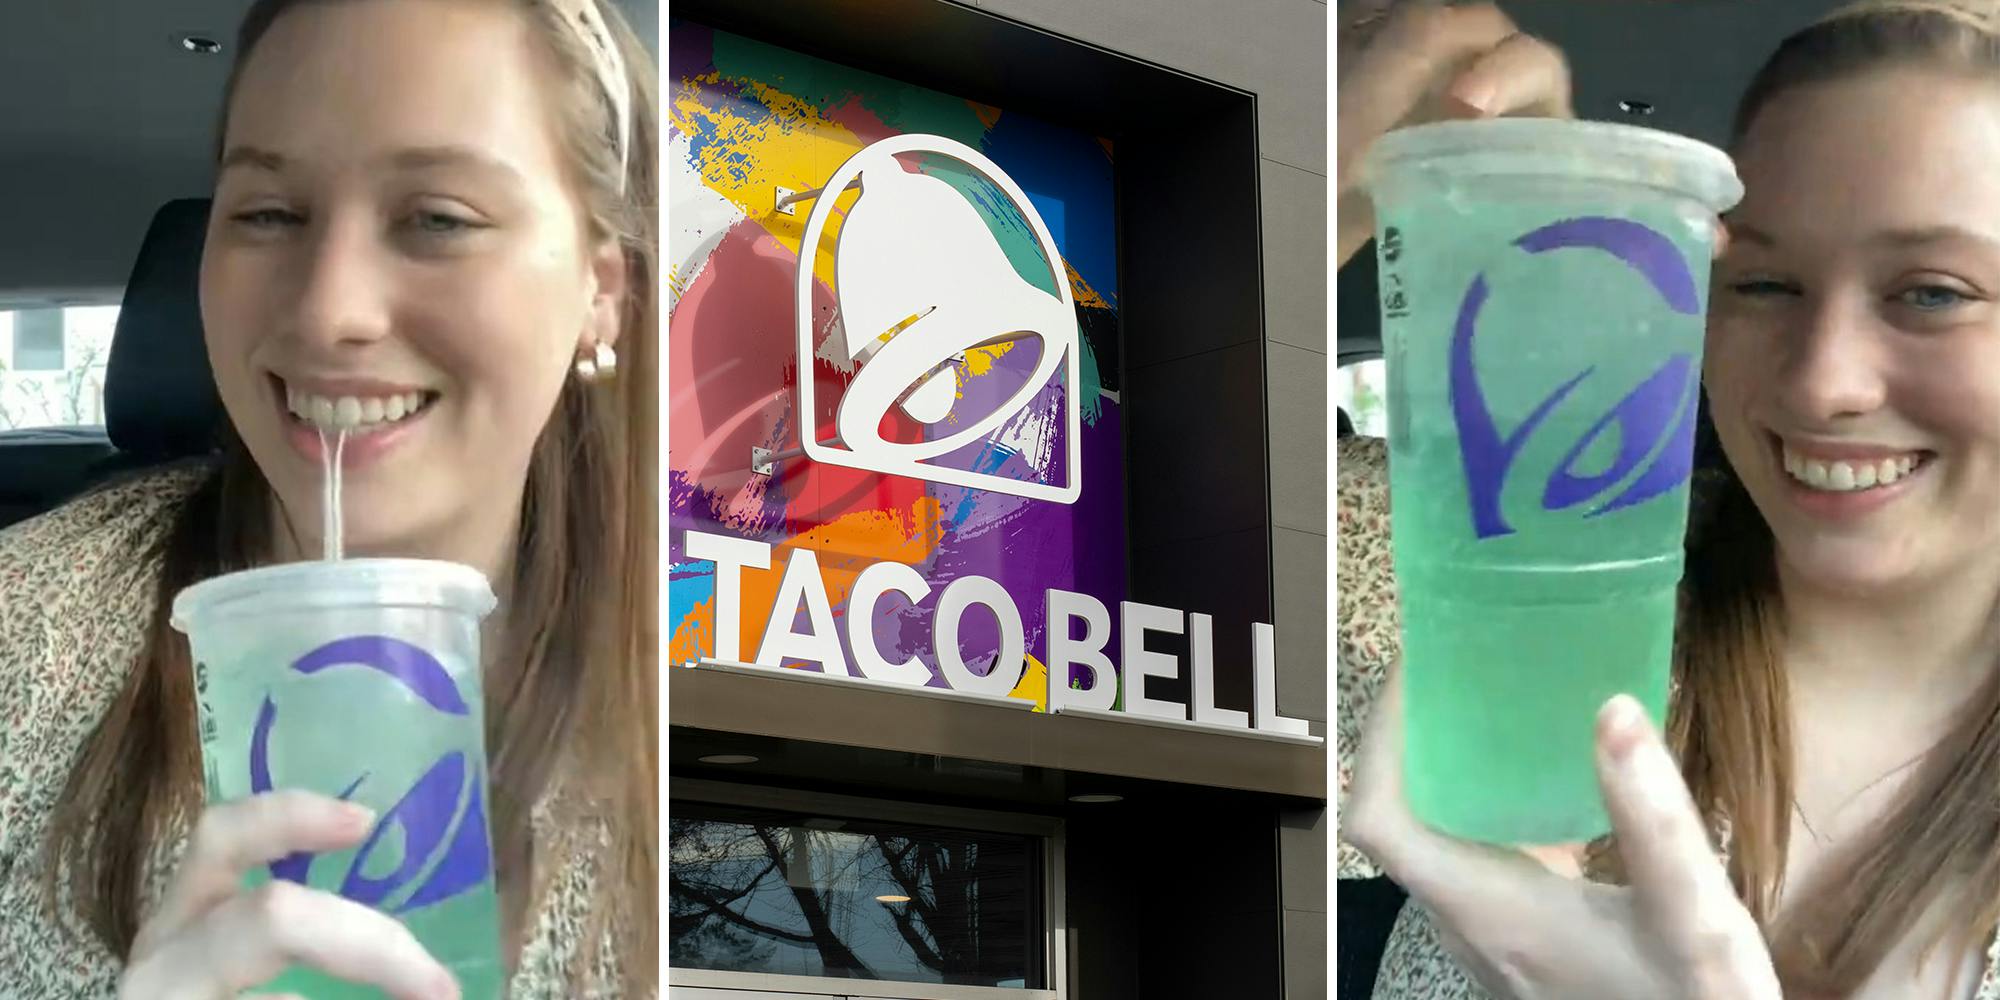 Taco Bell drive-thru customer pays almost $28 for a Baja Blast